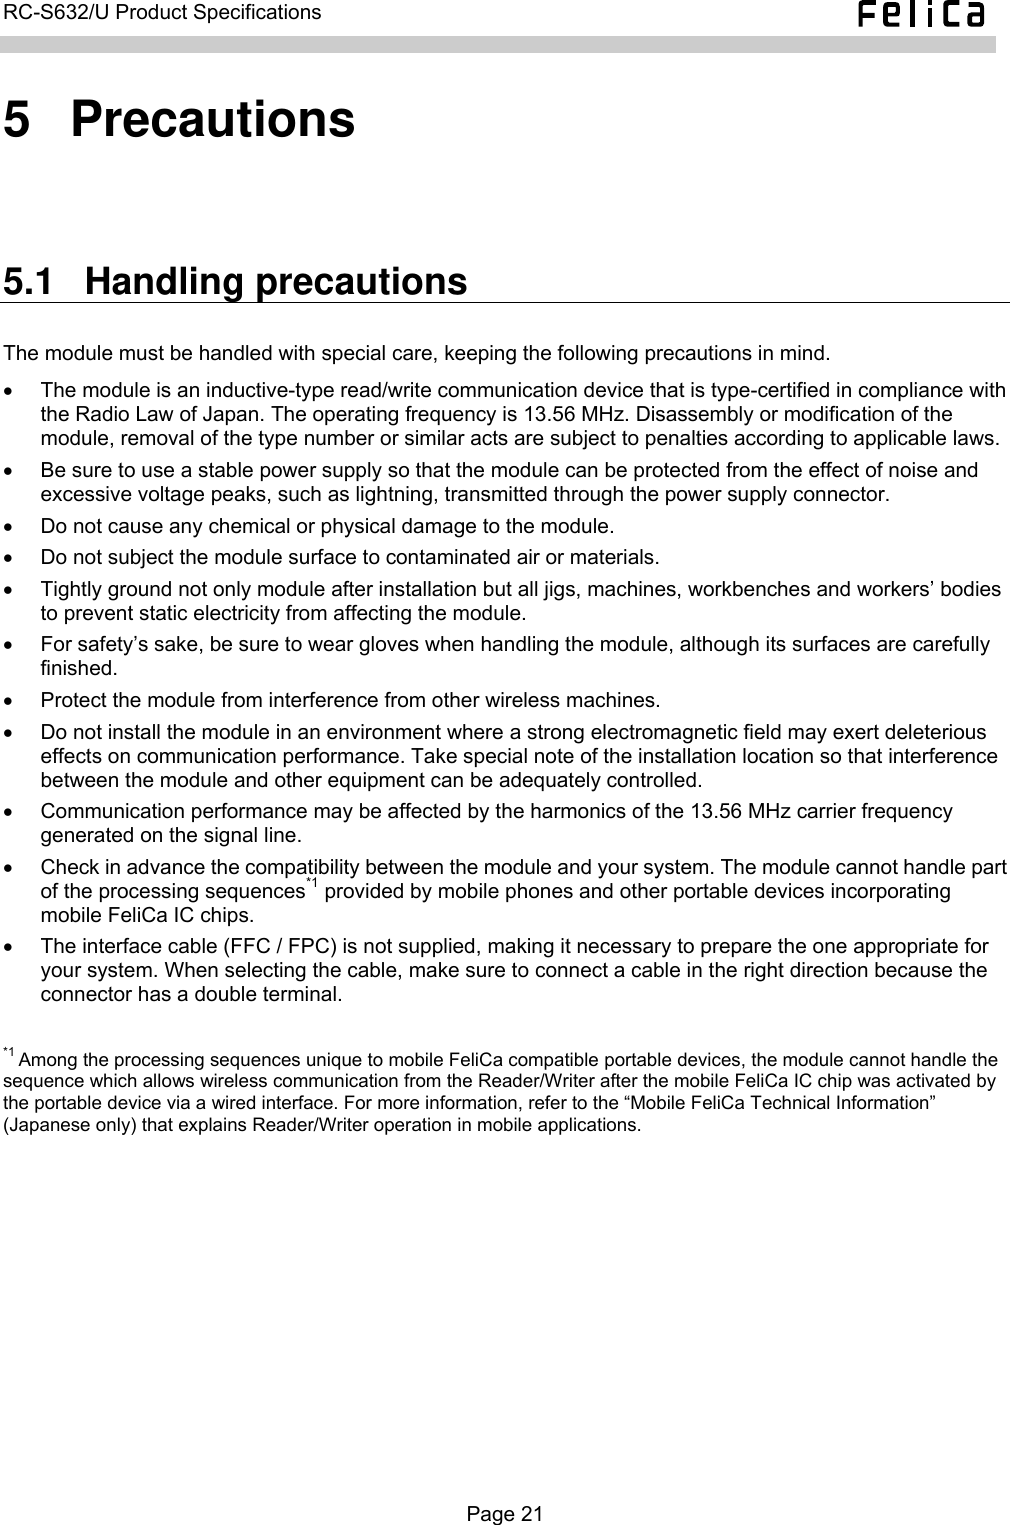   RC-S632/U Product Specifications  5  Precautions 5.1  Handling precautions The module must be handled with special care, keeping the following precautions in mind. •  The module is an inductive-type read/write communication device that is type-certified in compliance with the Radio Law of Japan. The operating frequency is 13.56 MHz. Disassembly or modification of the module, removal of the type number or similar acts are subject to penalties according to applicable laws. •  Be sure to use a stable power supply so that the module can be protected from the effect of noise and excessive voltage peaks, such as lightning, transmitted through the power supply connector. •  Do not cause any chemical or physical damage to the module. •  Do not subject the module surface to contaminated air or materials. •  Tightly ground not only module after installation but all jigs, machines, workbenches and workers’ bodies to prevent static electricity from affecting the module. •  For safety’s sake, be sure to wear gloves when handling the module, although its surfaces are carefully finished. •  Protect the module from interference from other wireless machines. •  Do not install the module in an environment where a strong electromagnetic field may exert deleterious effects on communication performance. Take special note of the installation location so that interference between the module and other equipment can be adequately controlled. •  Communication performance may be affected by the harmonics of the 13.56 MHz carrier frequency generated on the signal line. •  Check in advance the compatibility between the module and your system. The module cannot handle part of the processing sequences*1 provided by mobile phones and other portable devices incorporating mobile FeliCa IC chips. •  The interface cable (FFC / FPC) is not supplied, making it necessary to prepare the one appropriate for your system. When selecting the cable, make sure to connect a cable in the right direction because the connector has a double terminal.  *1 Among the processing sequences unique to mobile FeliCa compatible portable devices, the module cannot handle the sequence which allows wireless communication from the Reader/Writer after the mobile FeliCa IC chip was activated by the portable device via a wired interface. For more information, refer to the “Mobile FeliCa Technical Information” (Japanese only) that explains Reader/Writer operation in mobile applications.  Page 21  